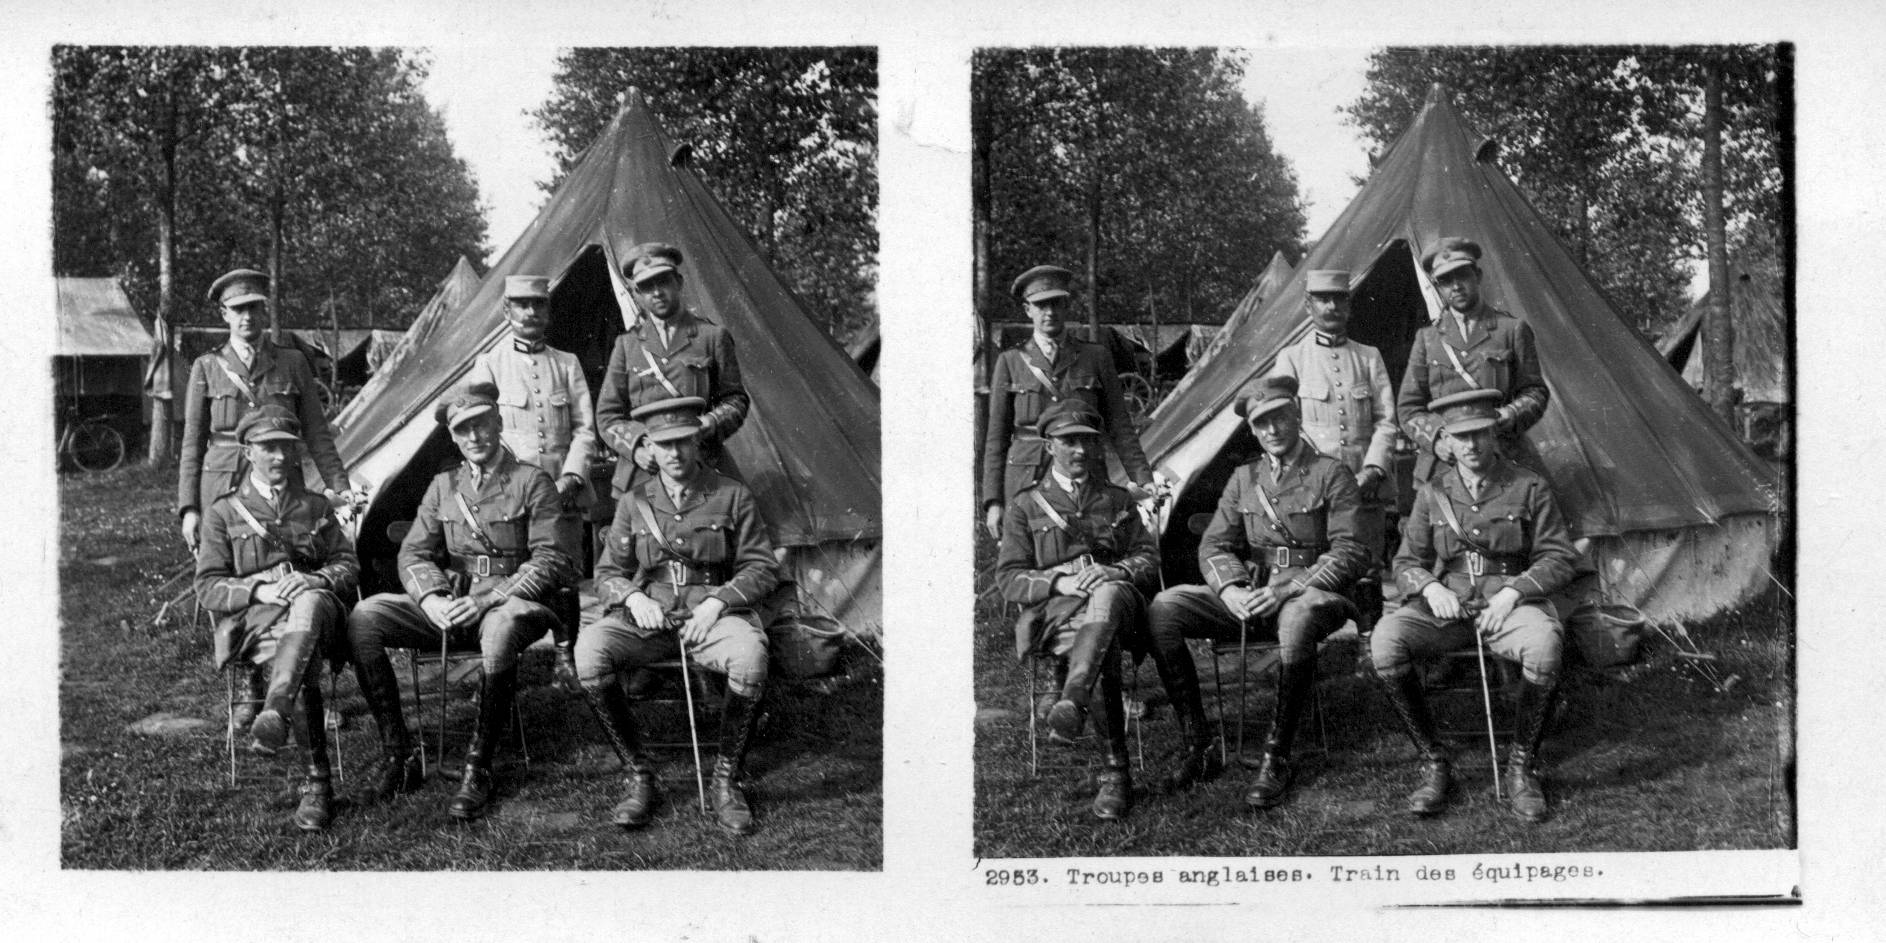 "Troupes anglaise. Train des equipages" - Allied officers pose for the camera